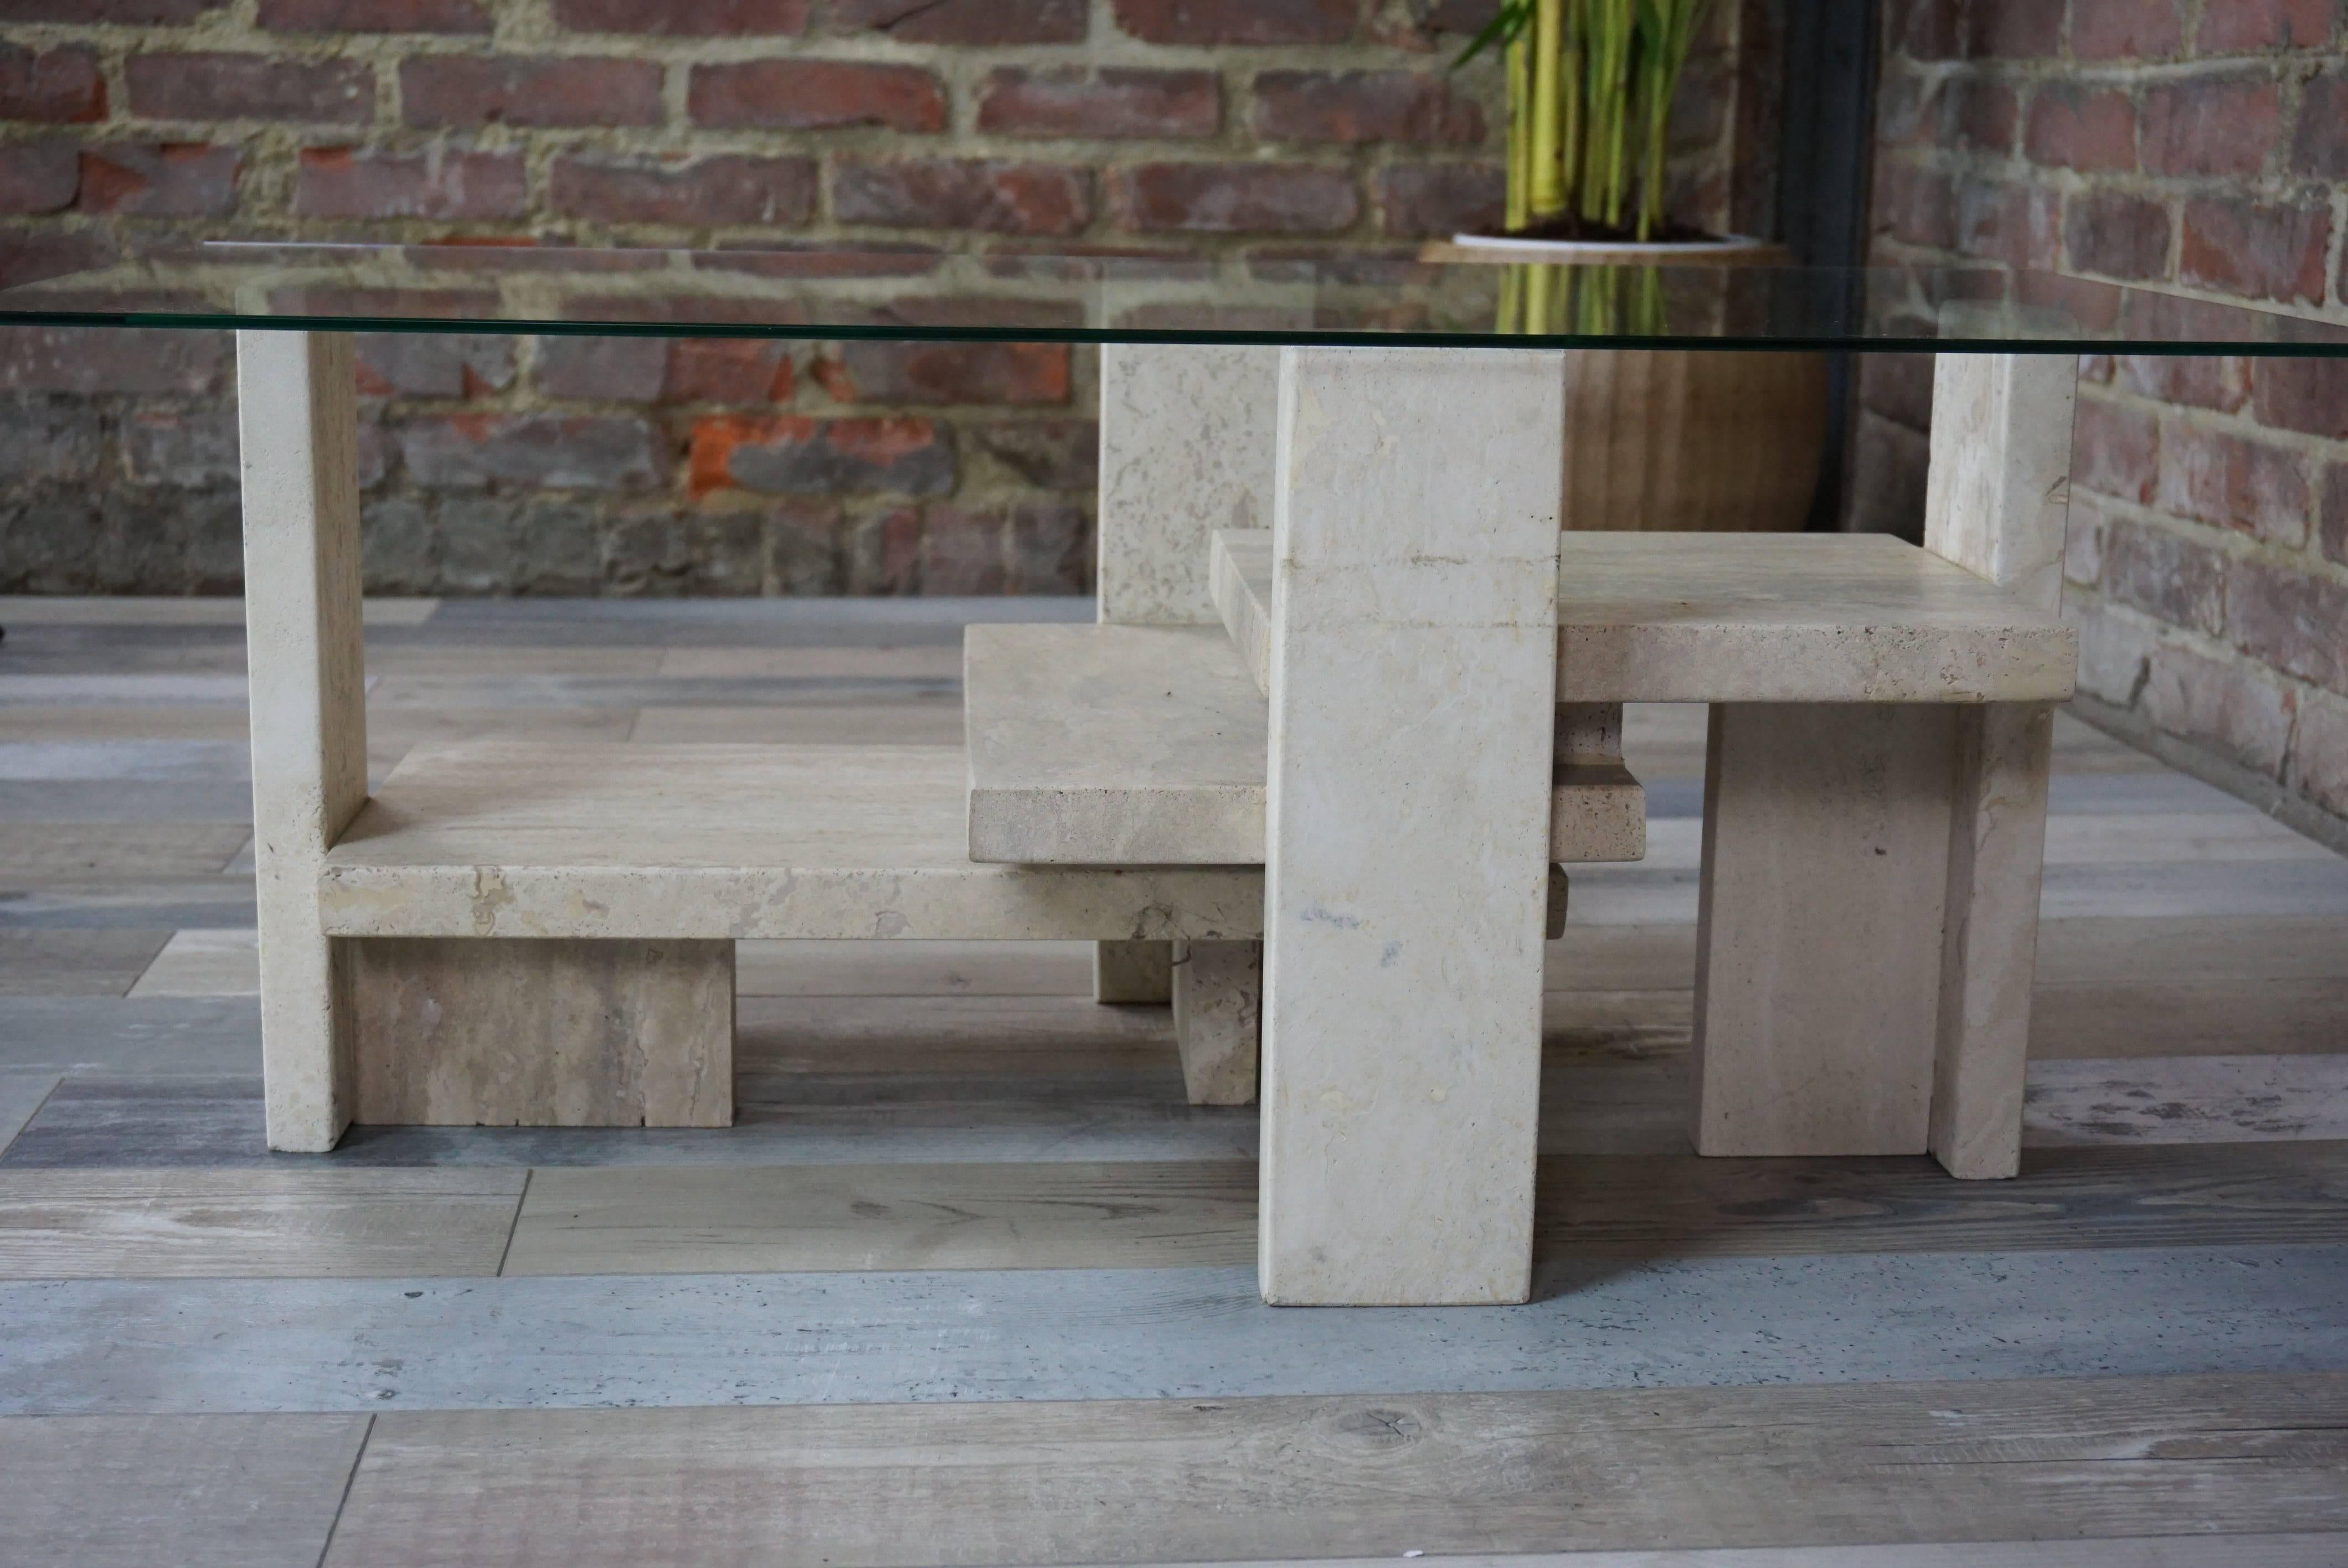 Sculptural, graphic and design, its structure in travertine makes it a true work of art by Willy Ballez.